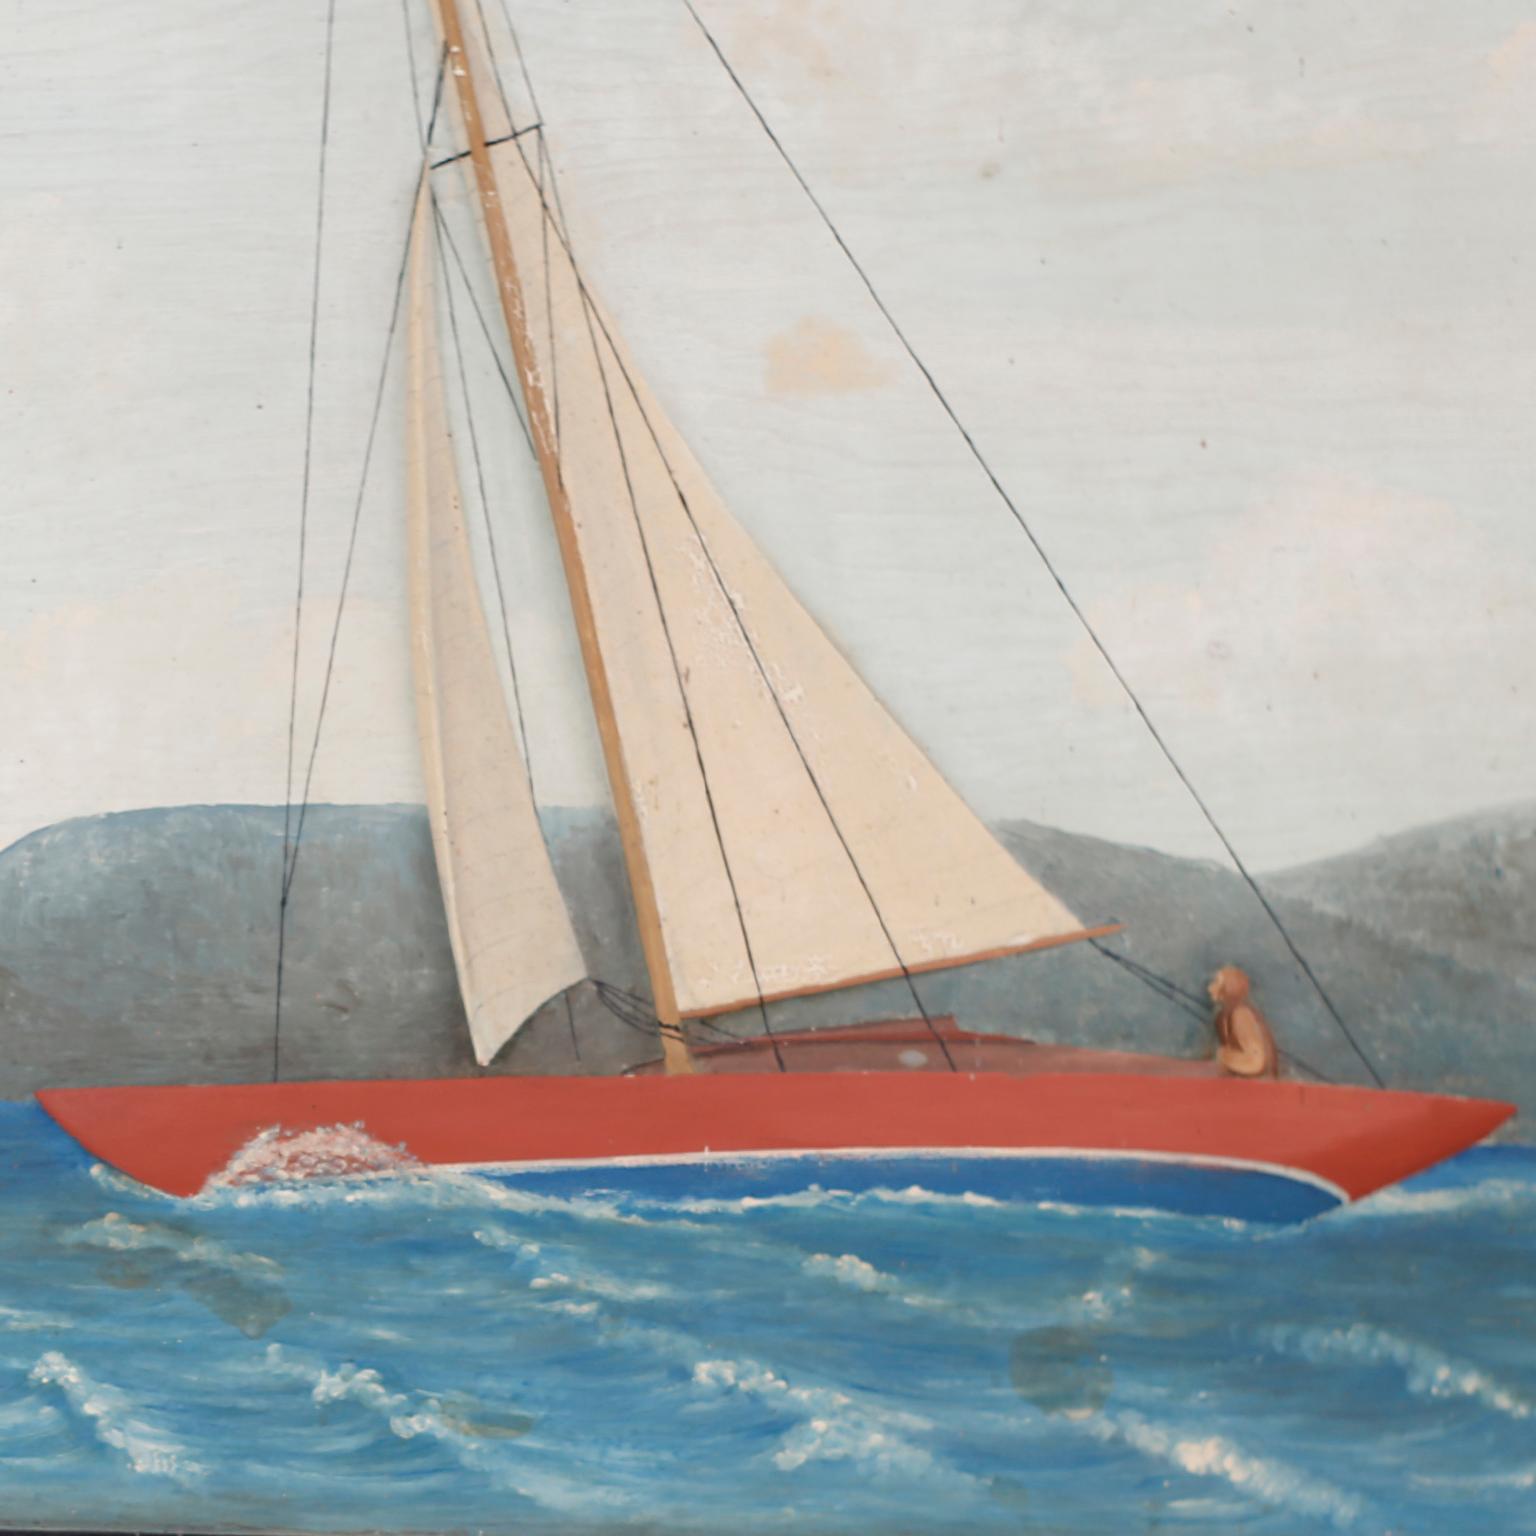 Vintage diorama of a red sailboat on a choppy lake carved and painted on a wood panel in a naive folk style, presented in a wood frame decorated with anchors and titled Finnan Haddie and dated 1933.